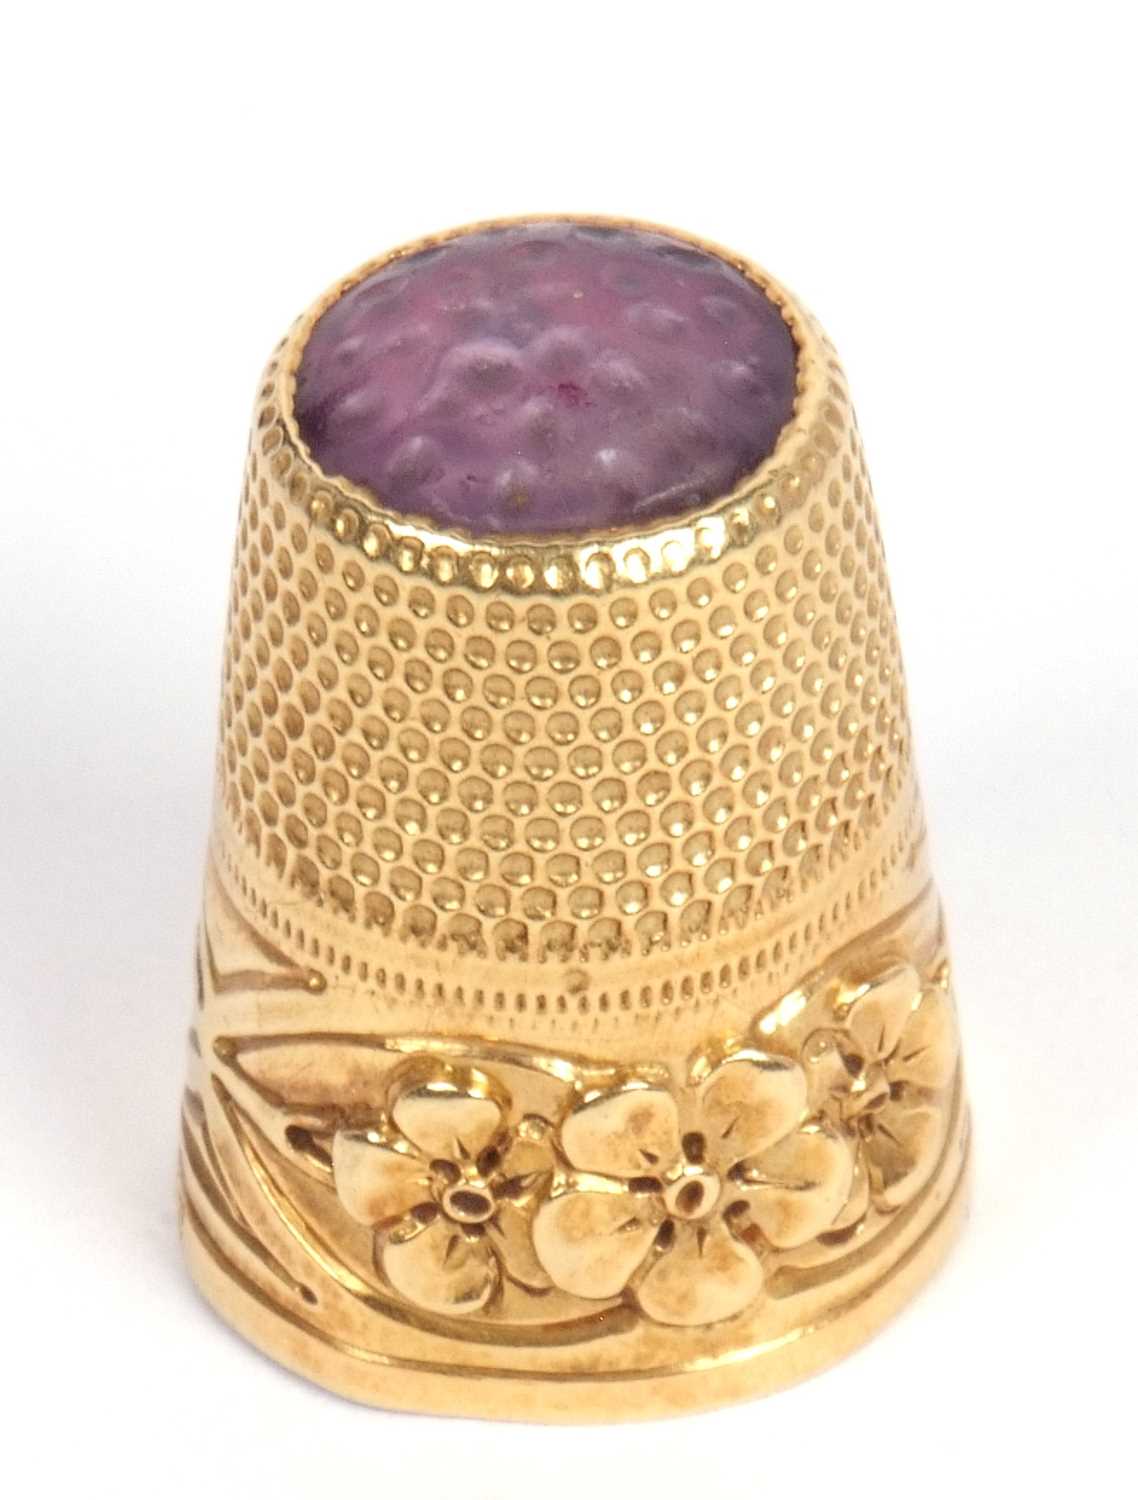 Antique 750 stamped thimble with a three leaf clover motif bottom band, the crown/cap with purple - Image 7 of 7